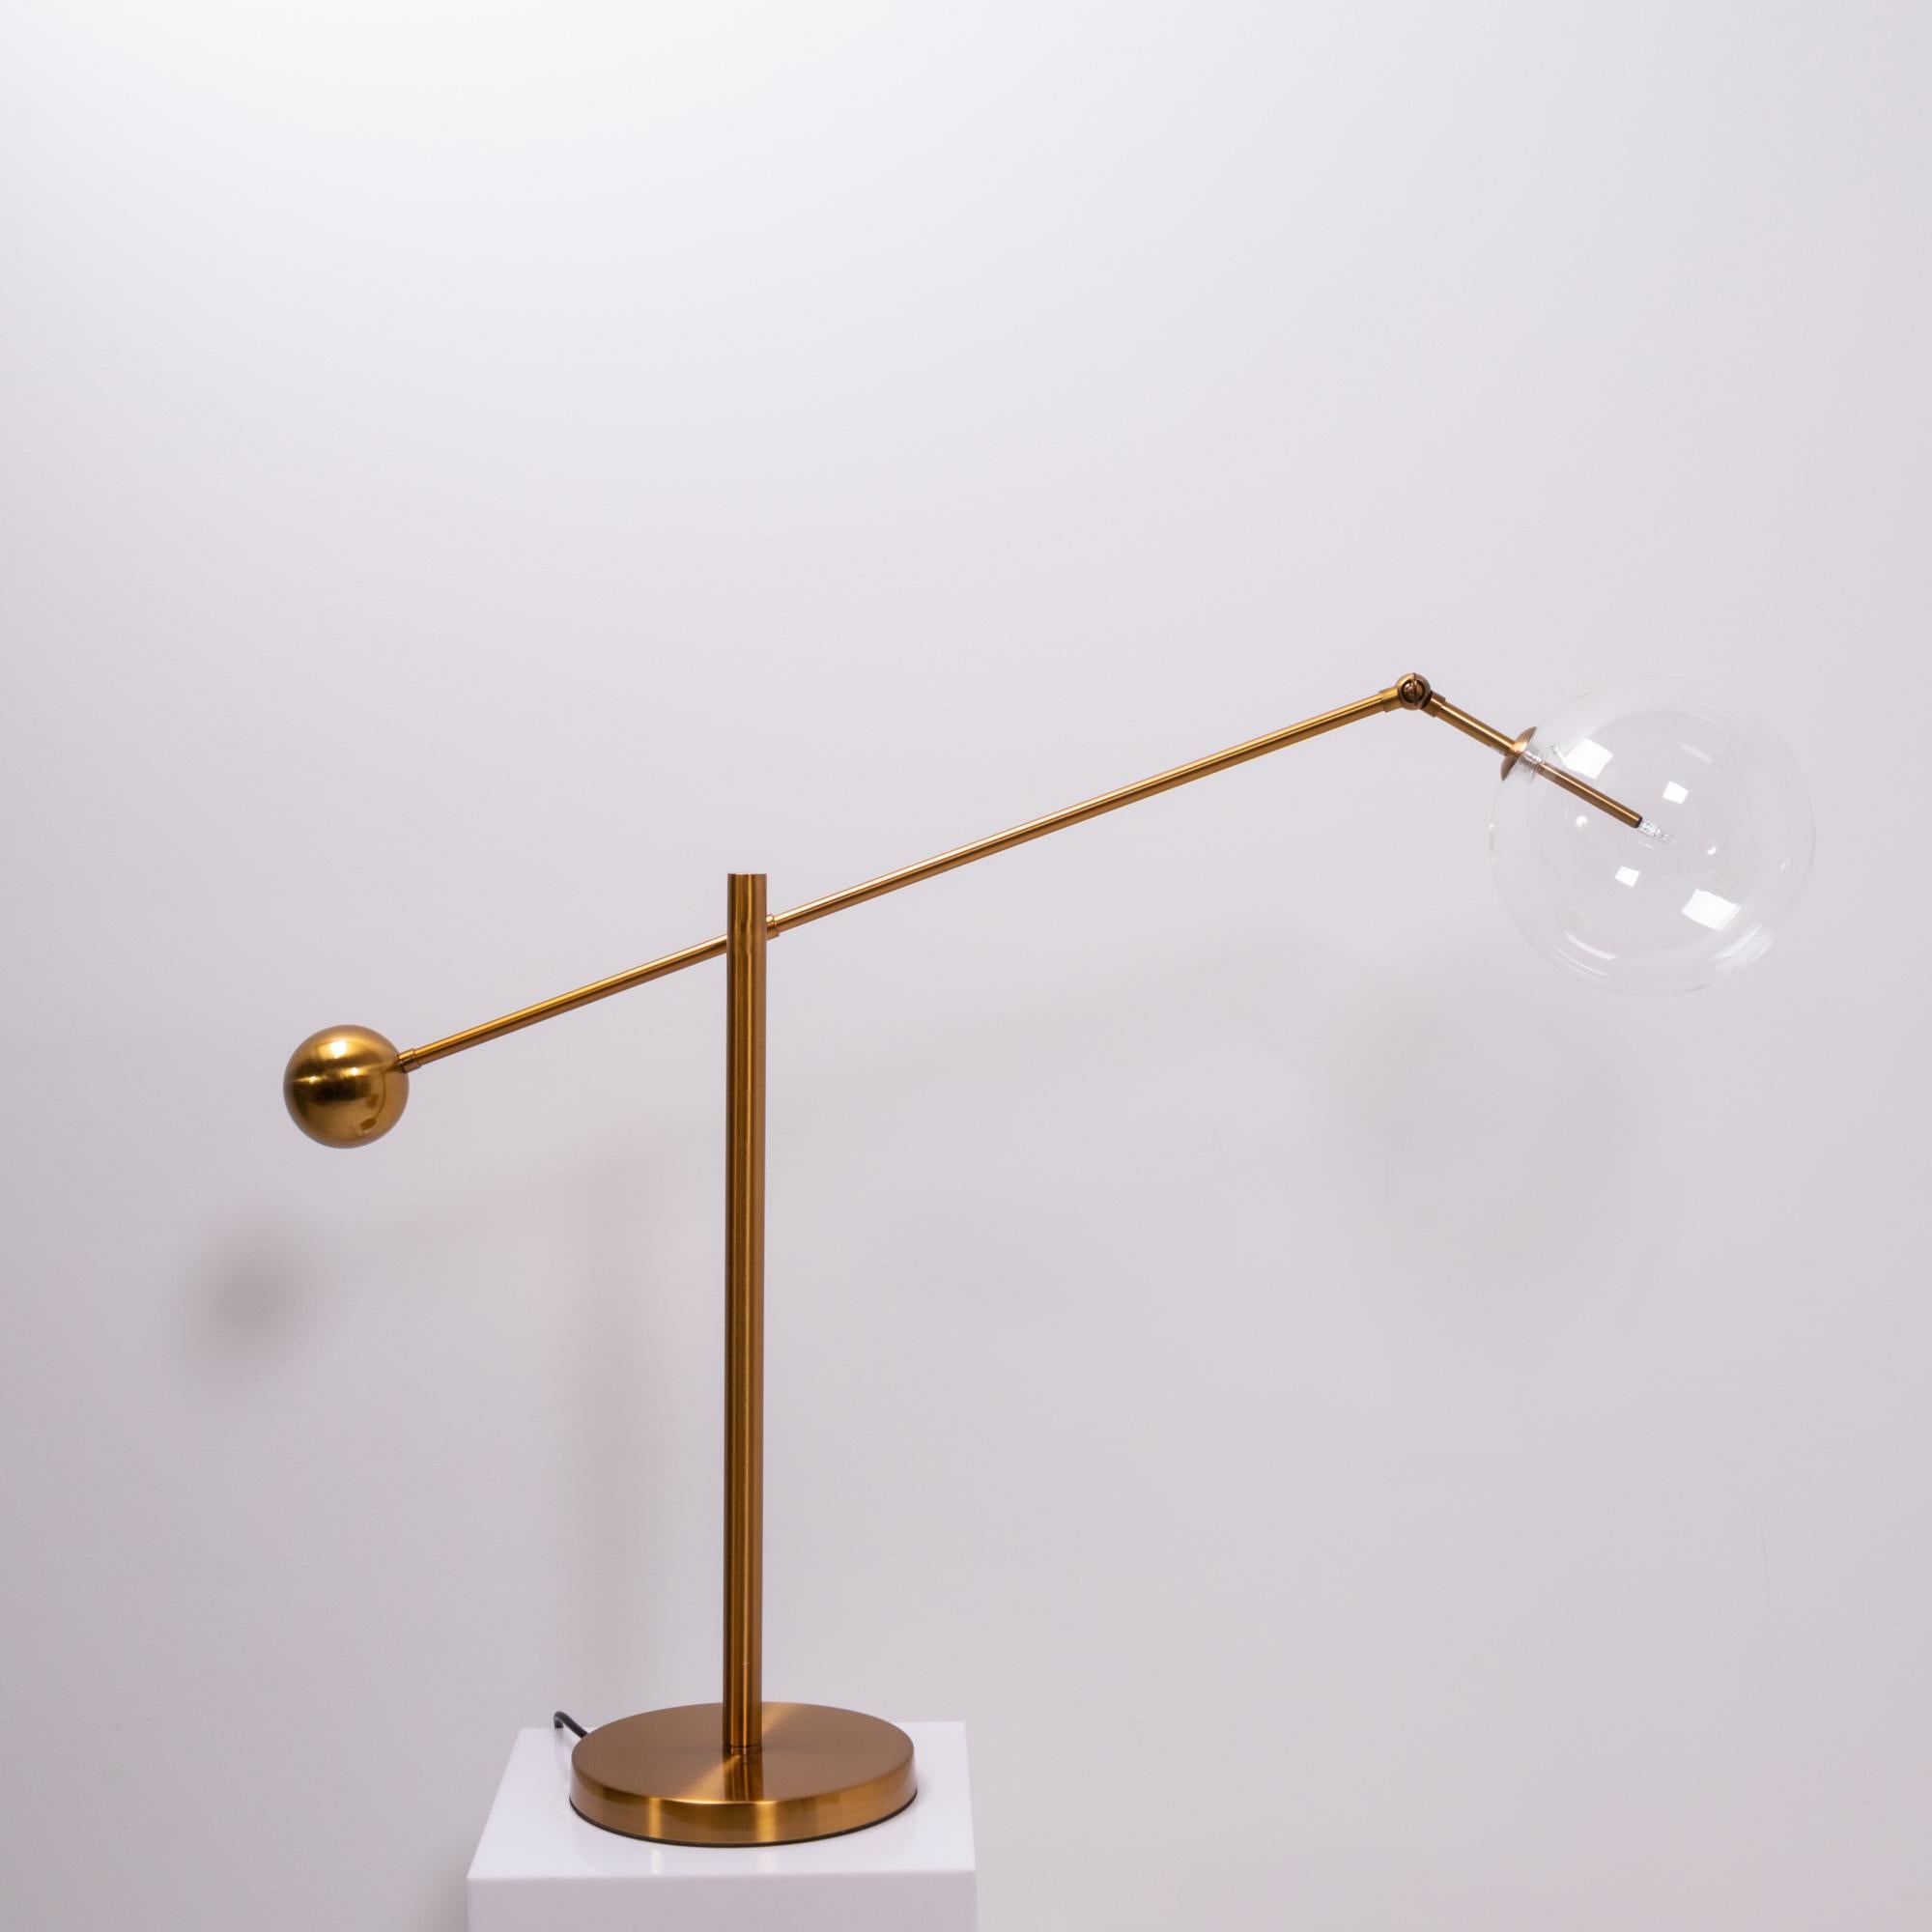 Inspired by midcentury Italian design, this table lamp features a striking globe shade in clear glass.

Sitting on a round brass base, the arm cantilevers off of the stand and is weighted at the end with a brass sphere.

The lamp has a UK plug